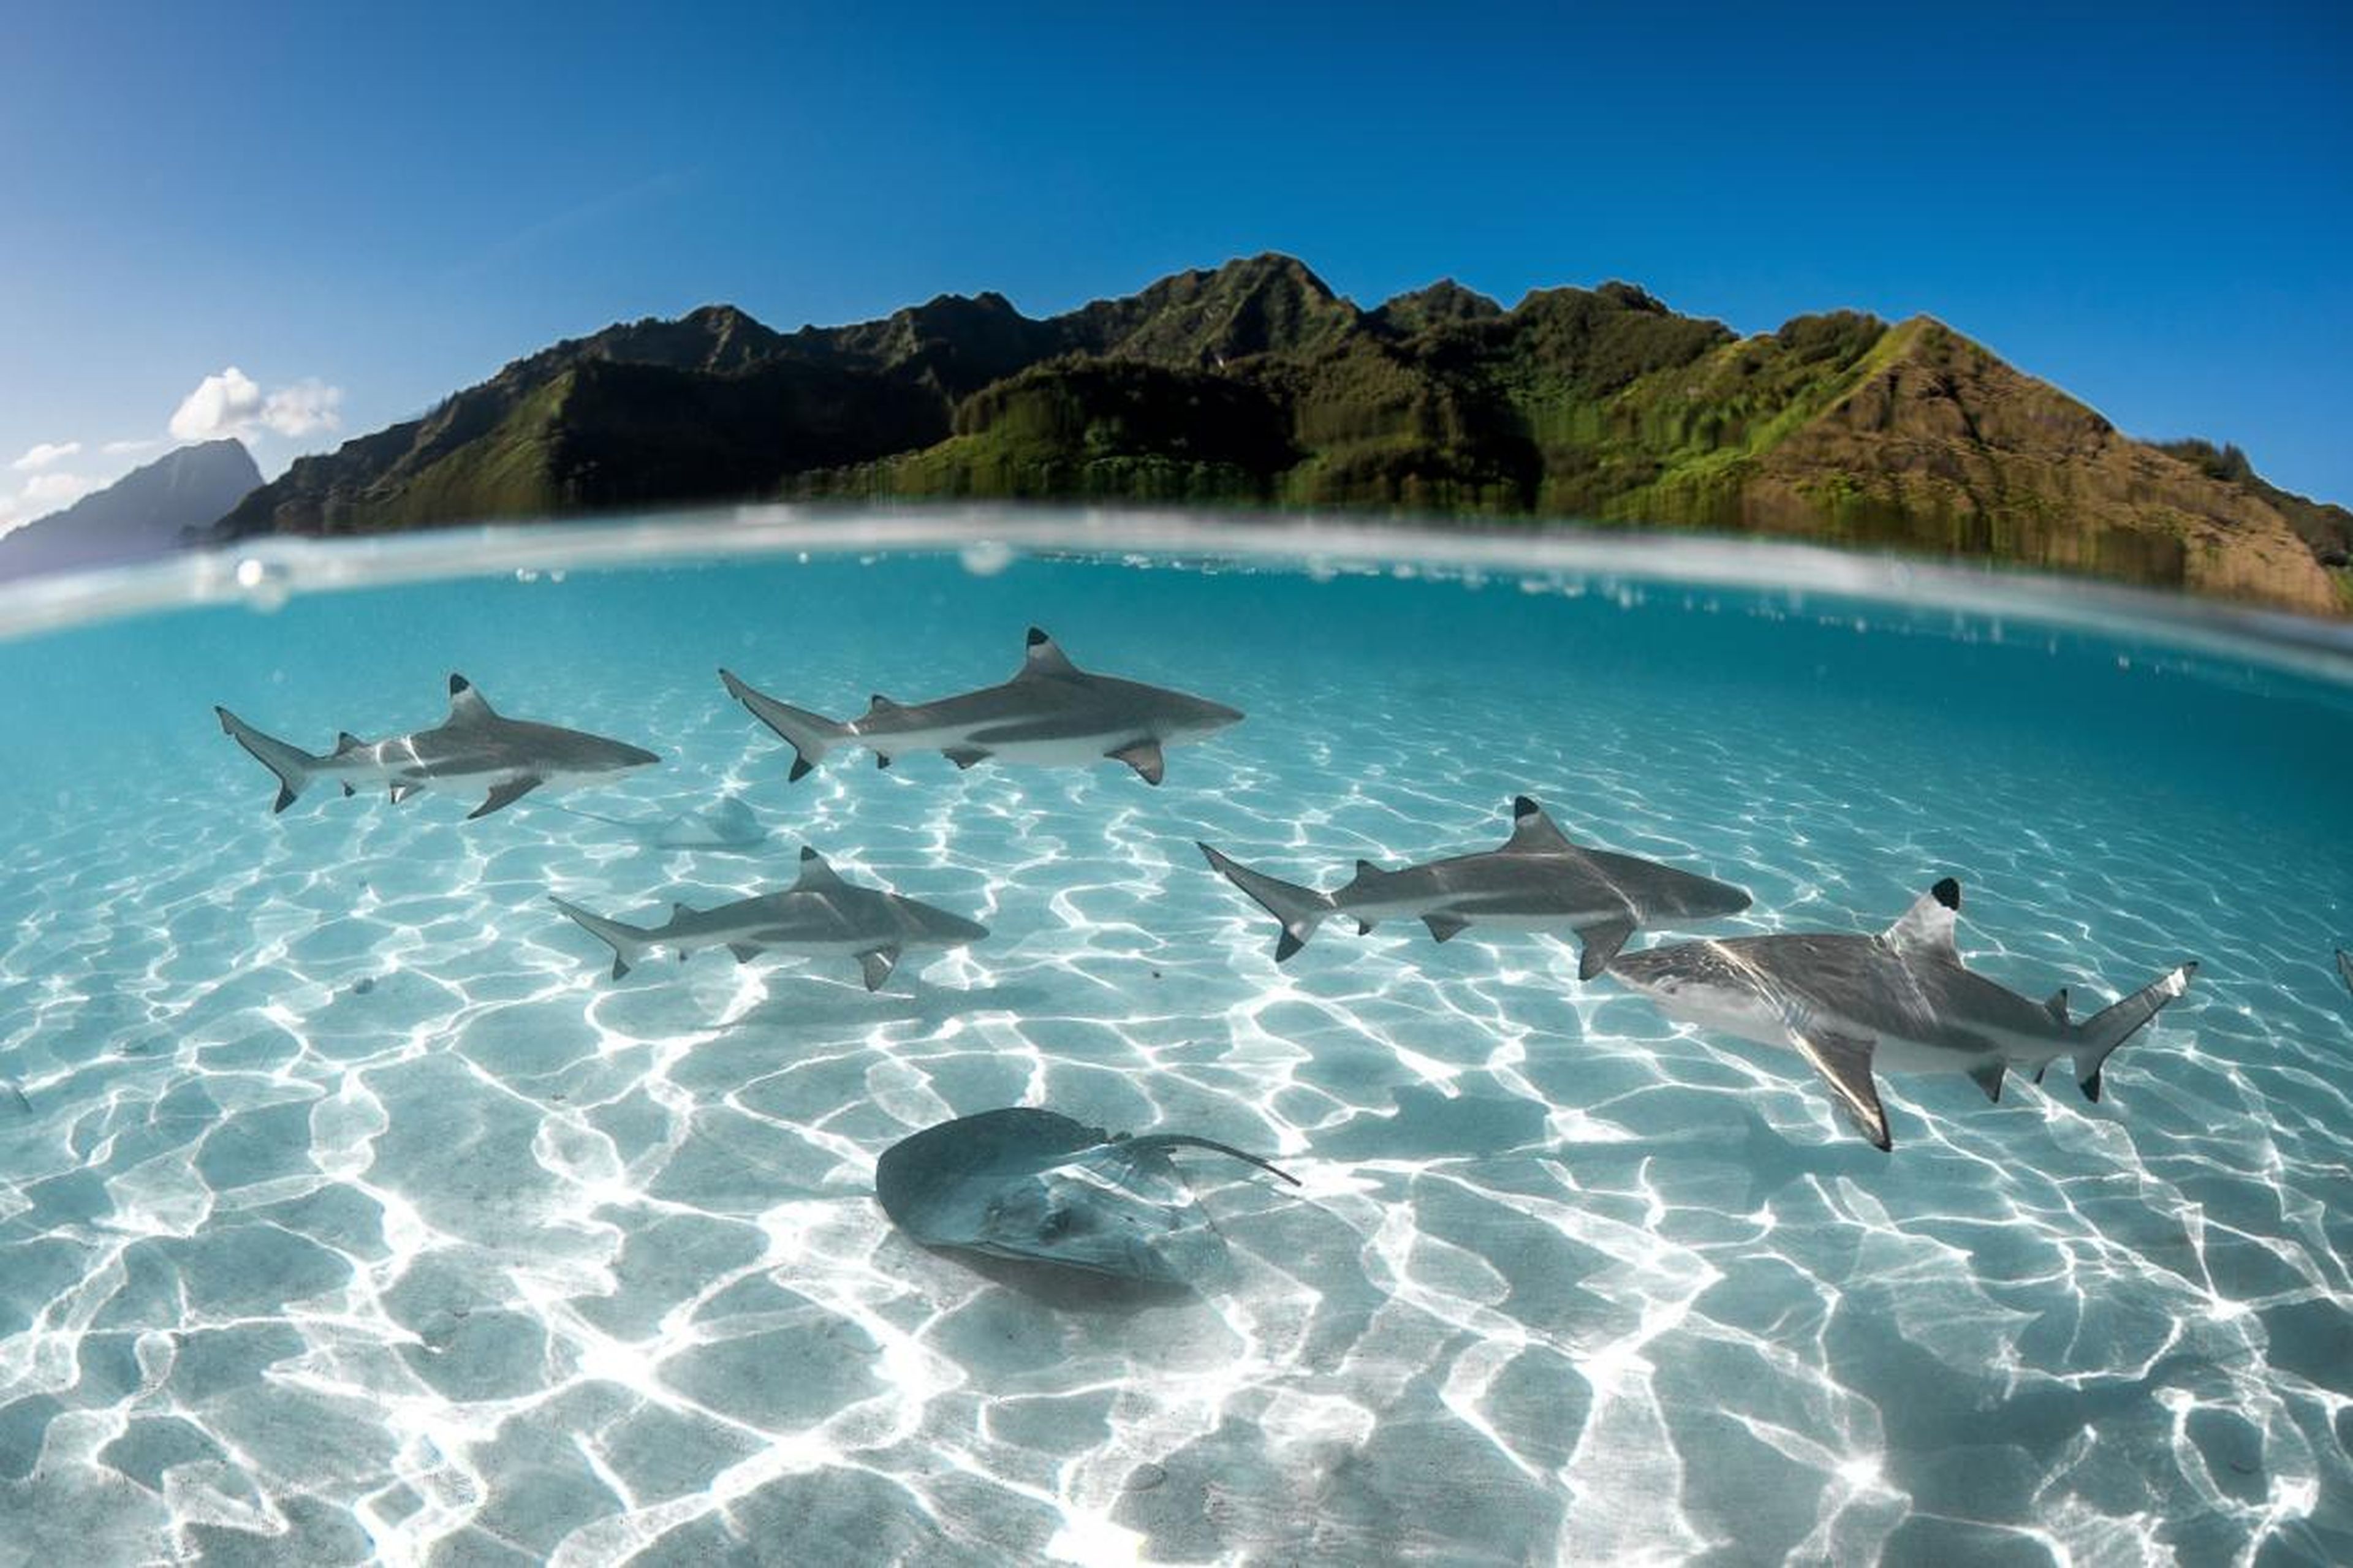 Photographer Greg Fleurentin won a gold medal for this image of sharks and a ray in French Polynesia's Moorea Lagoon.